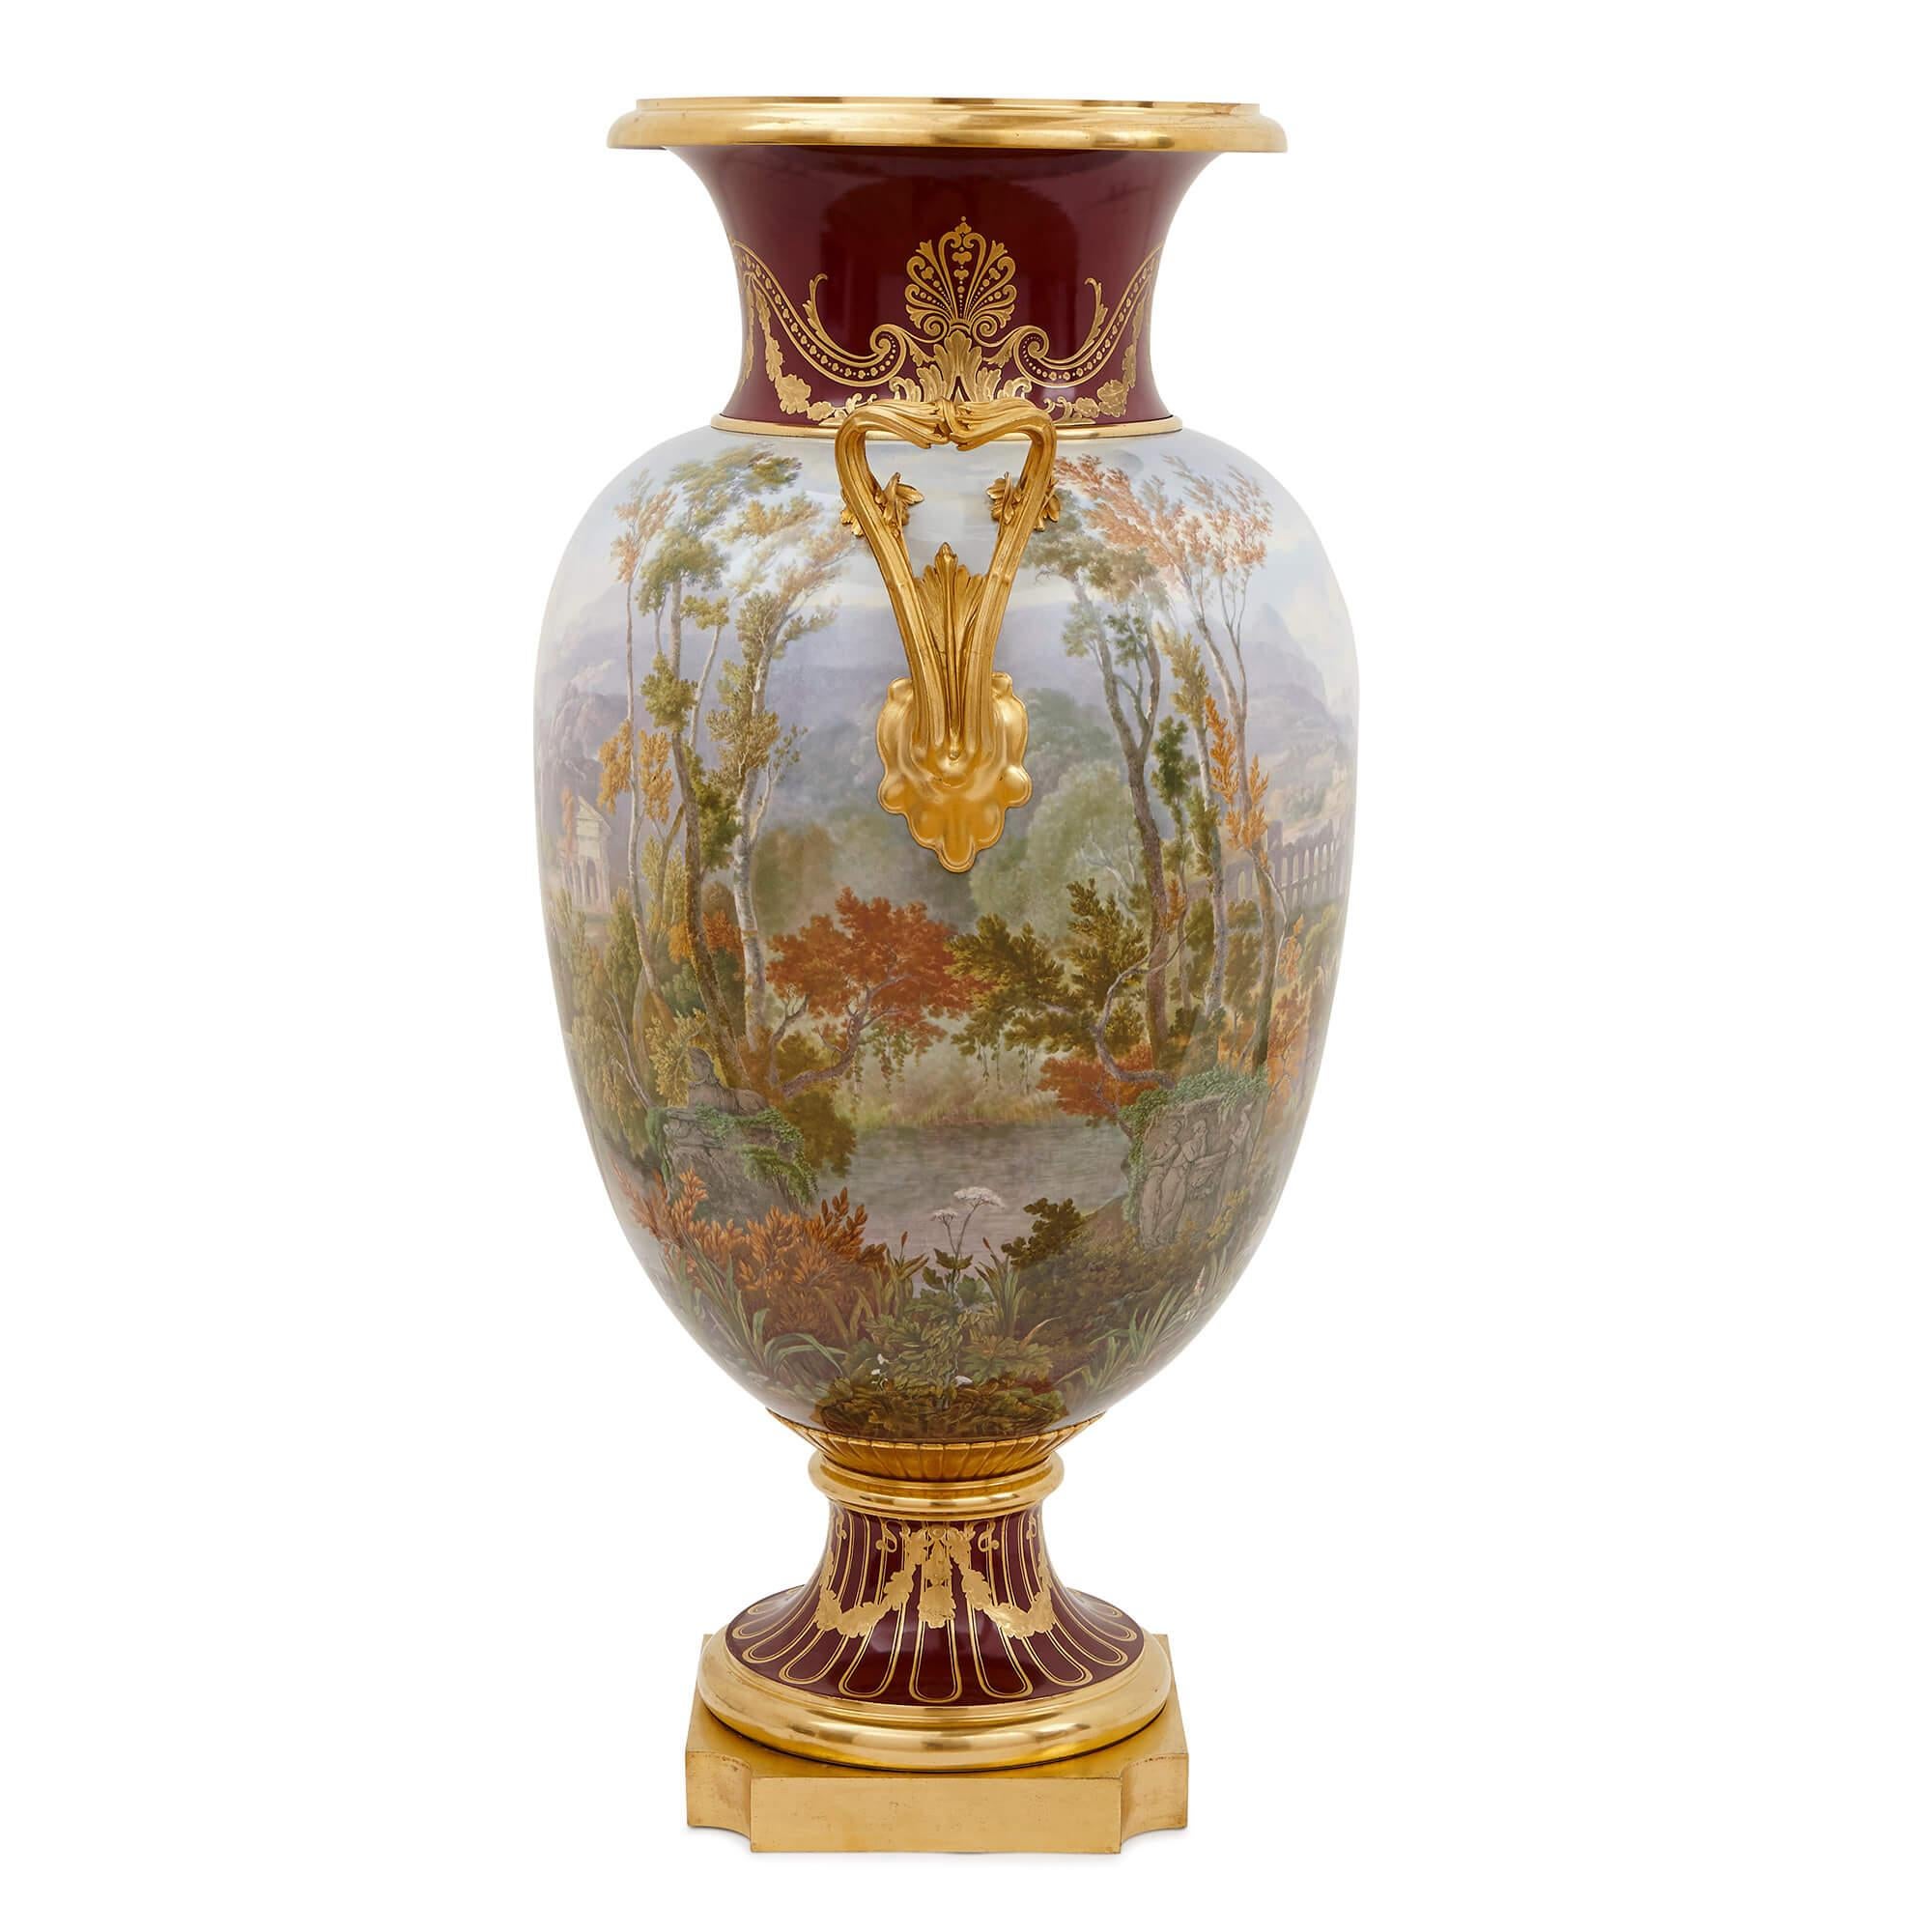 Napoleon III Pair of Antique Porcelain Vases by Sevres